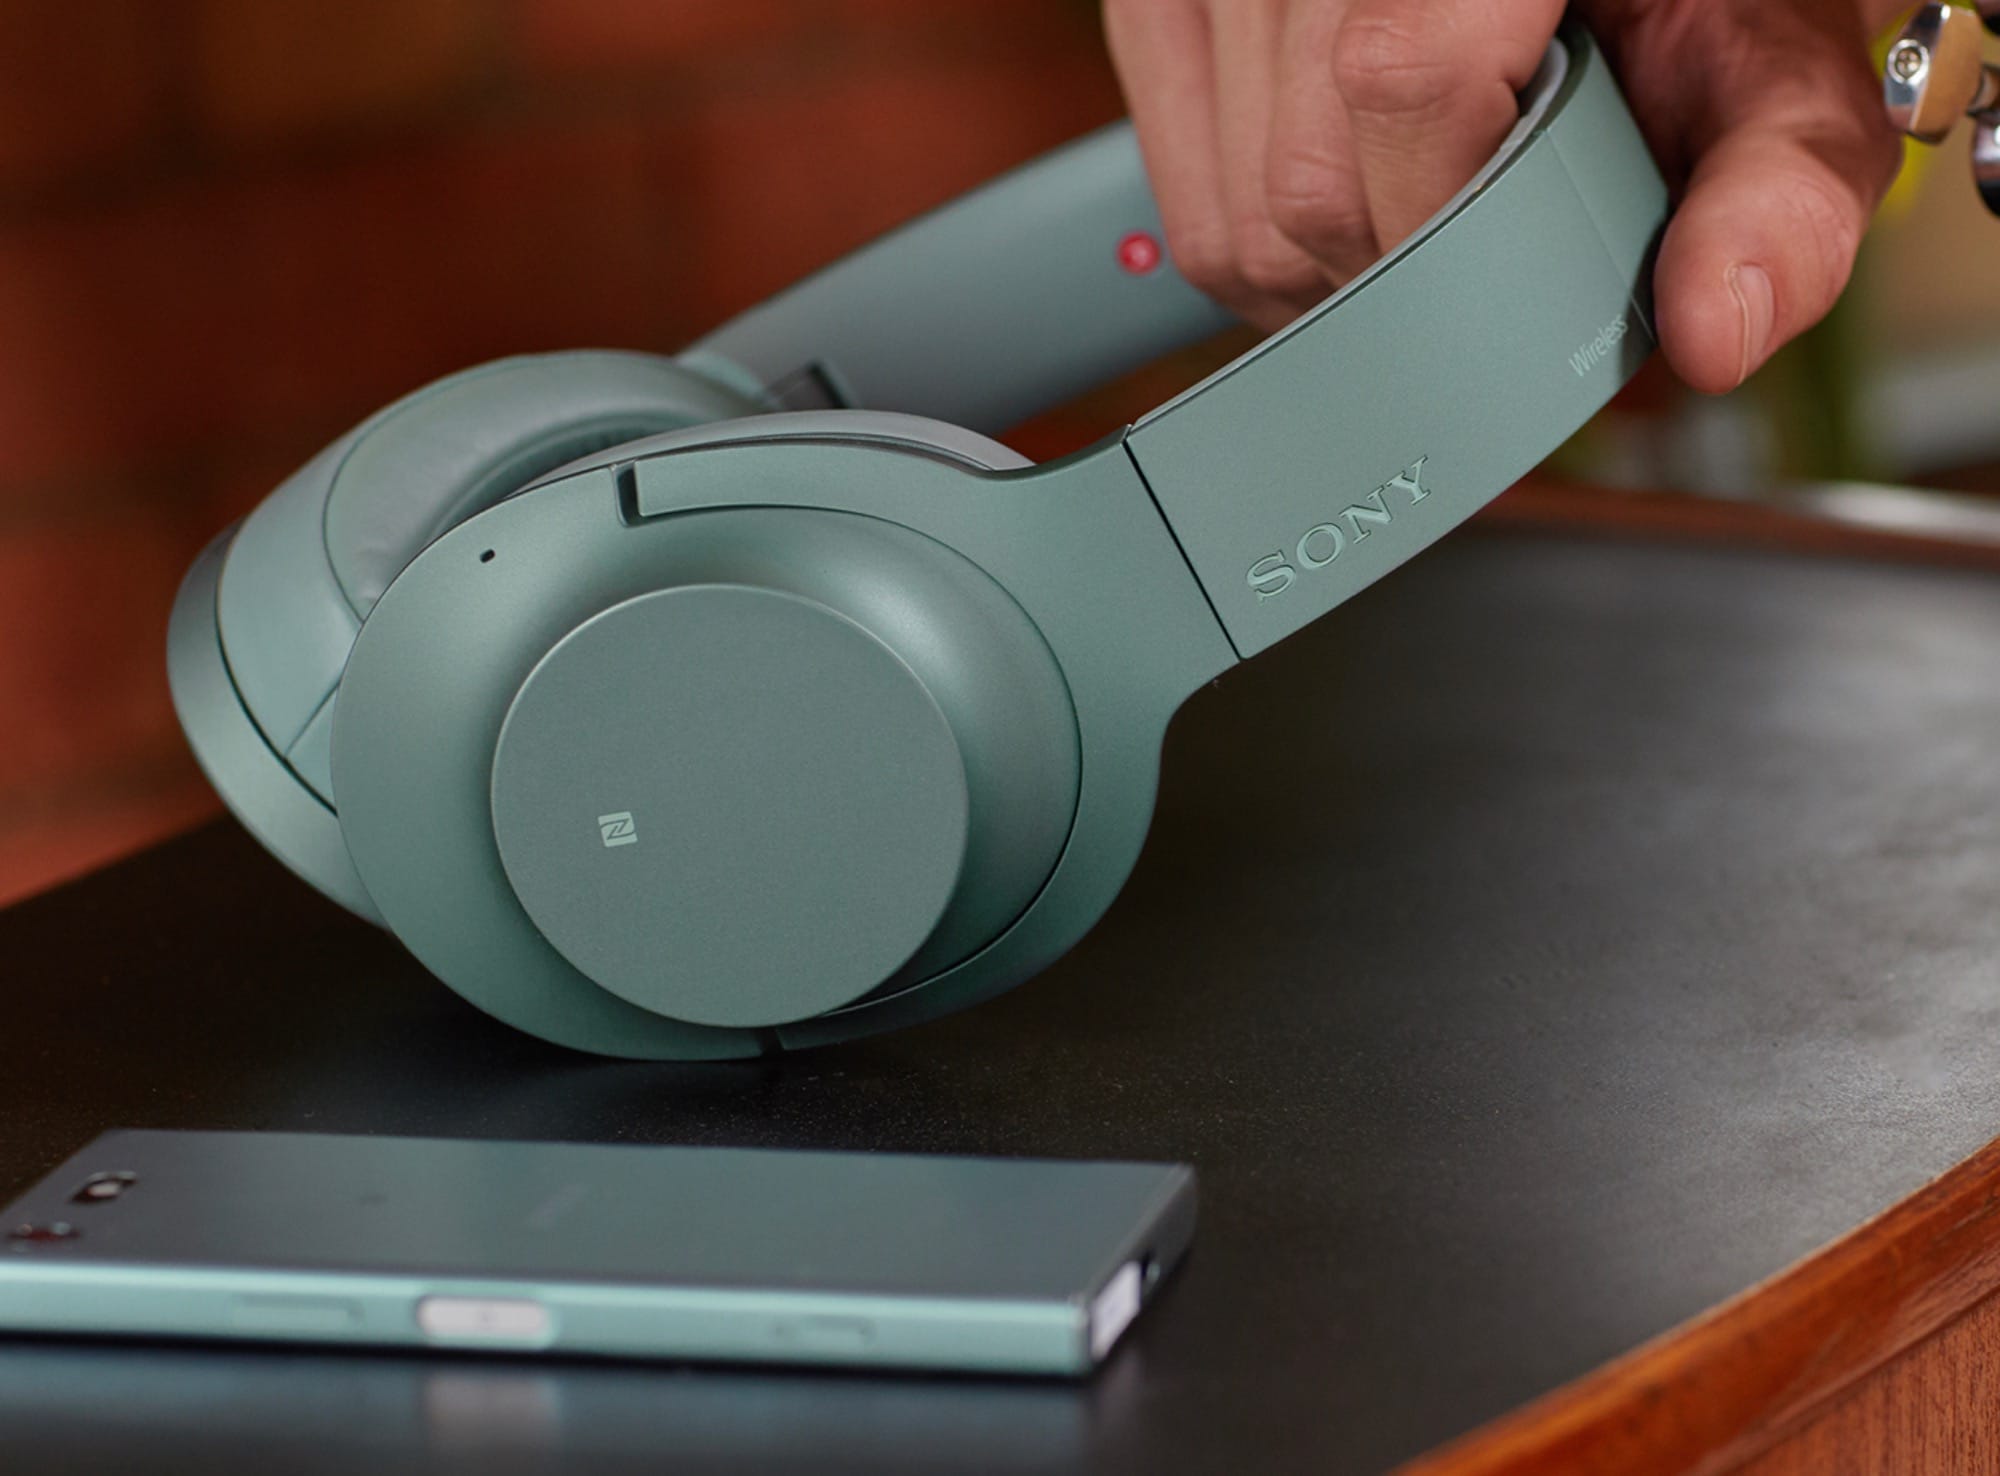 The only bad thing about the Sony WH-H900N headphones is the name.